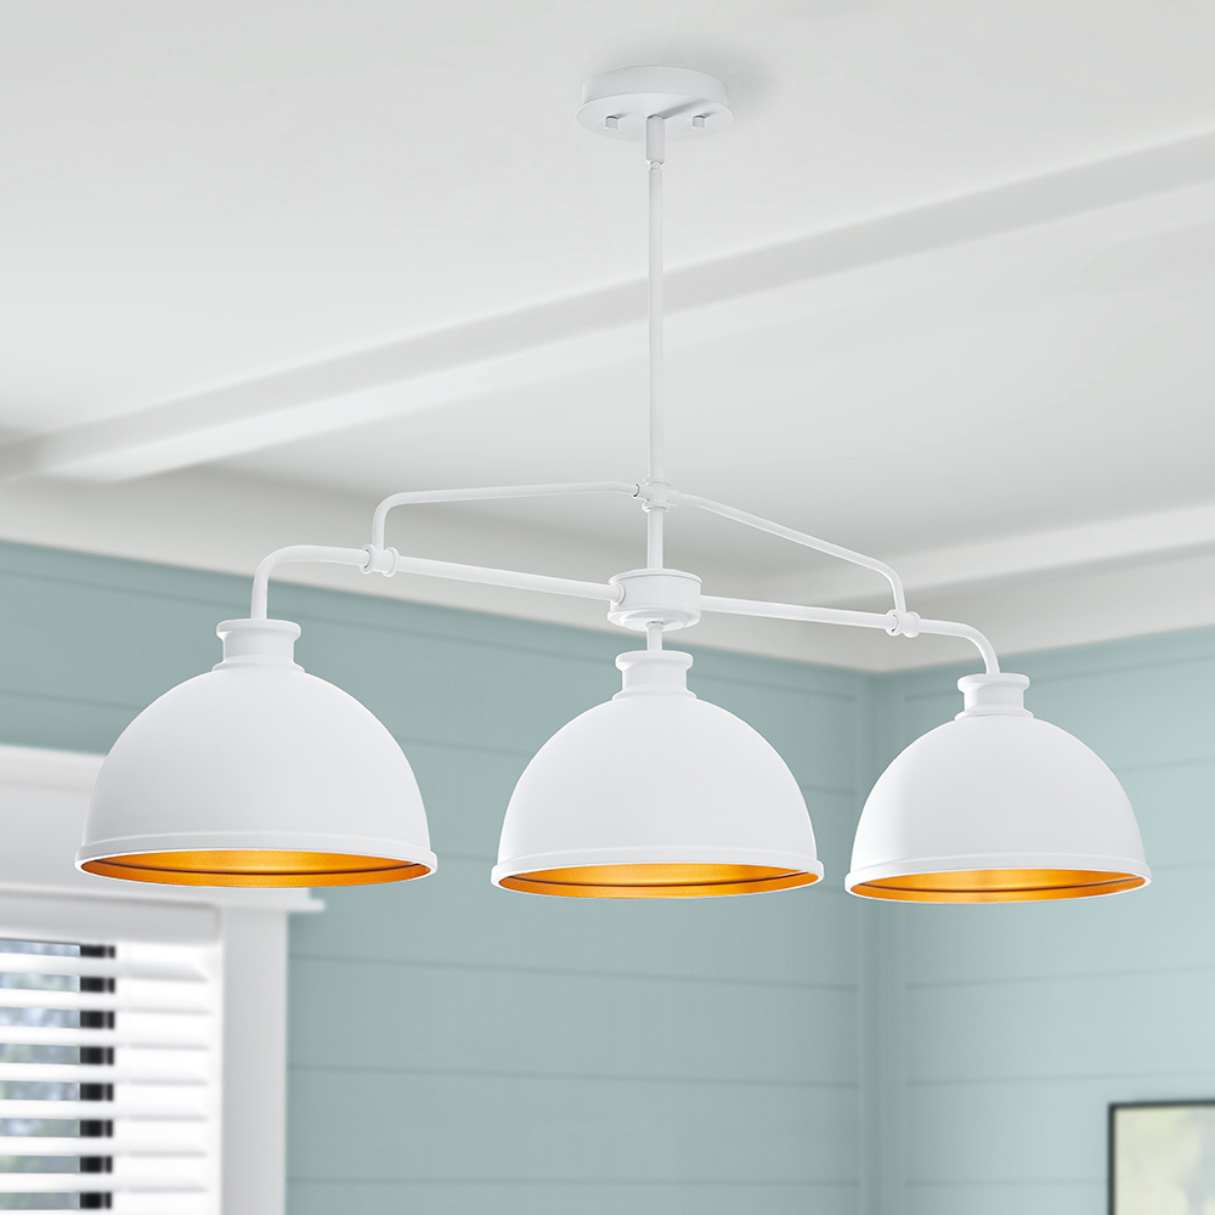 How To Install Ceiling Lights Without Wiring